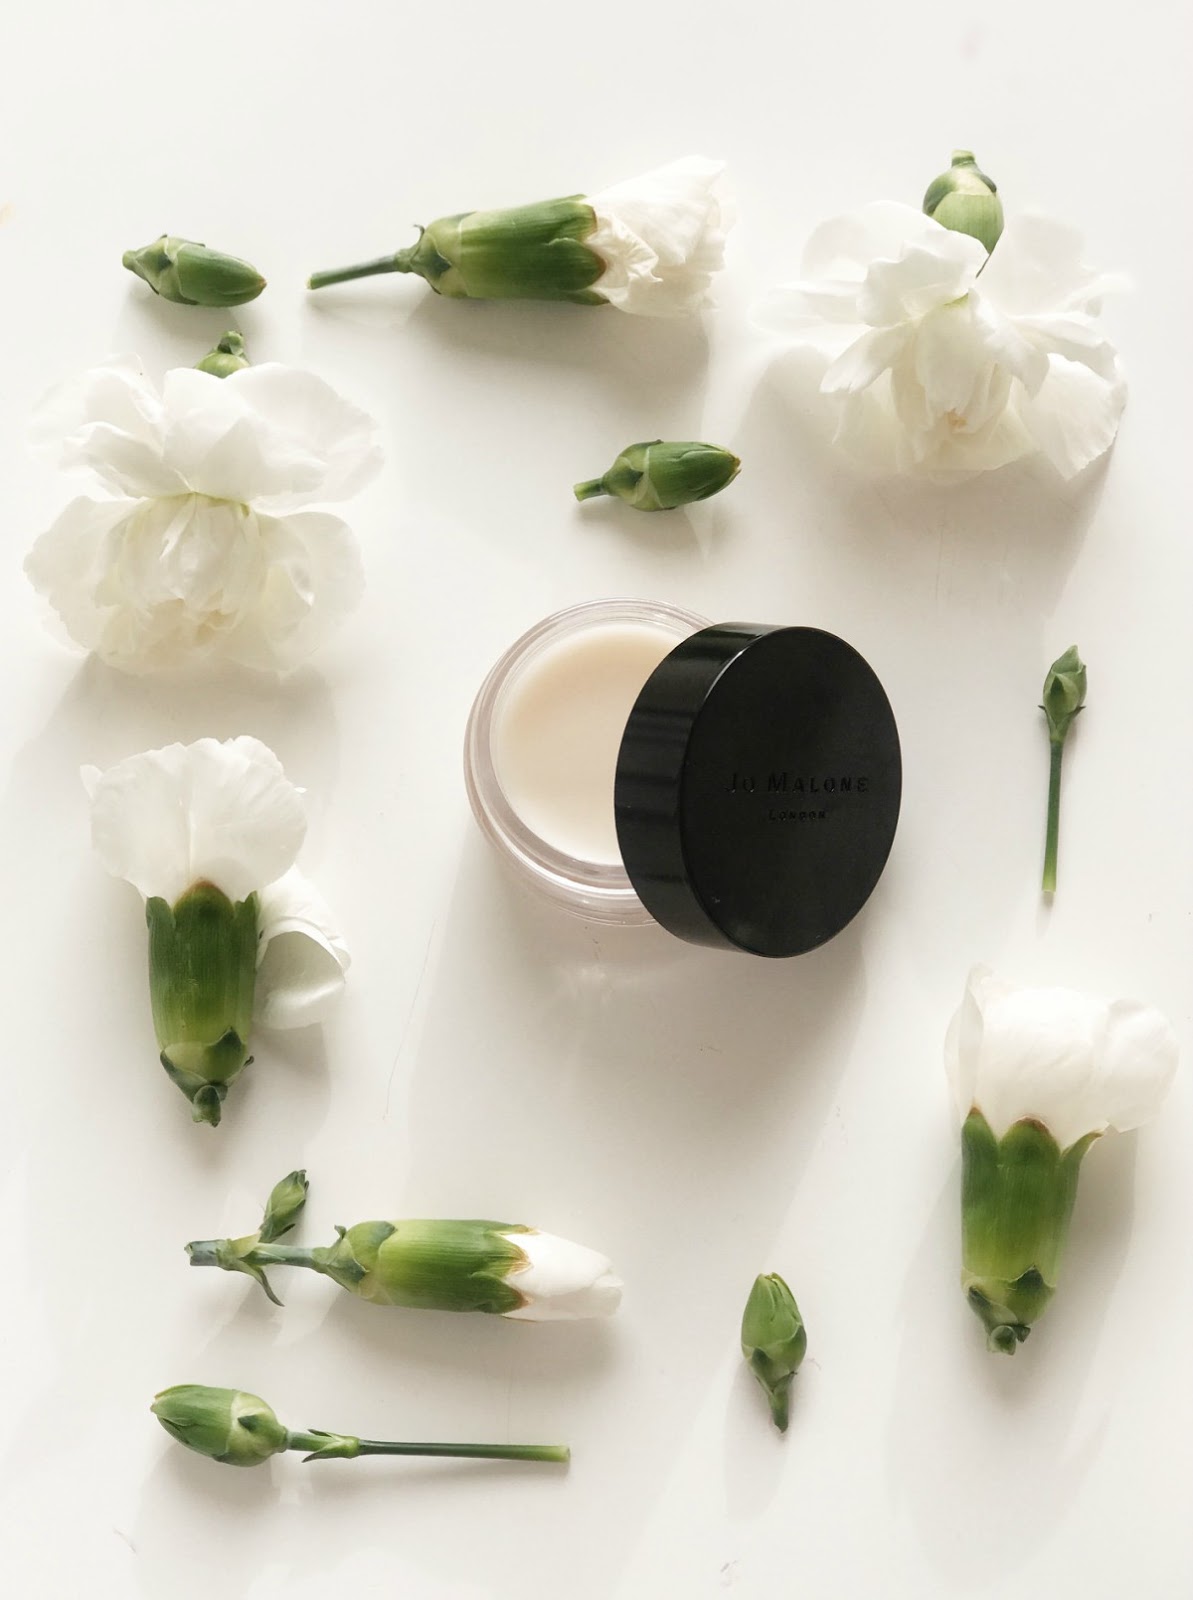 Jo Malone English Mint & Ginger Lip Care Review